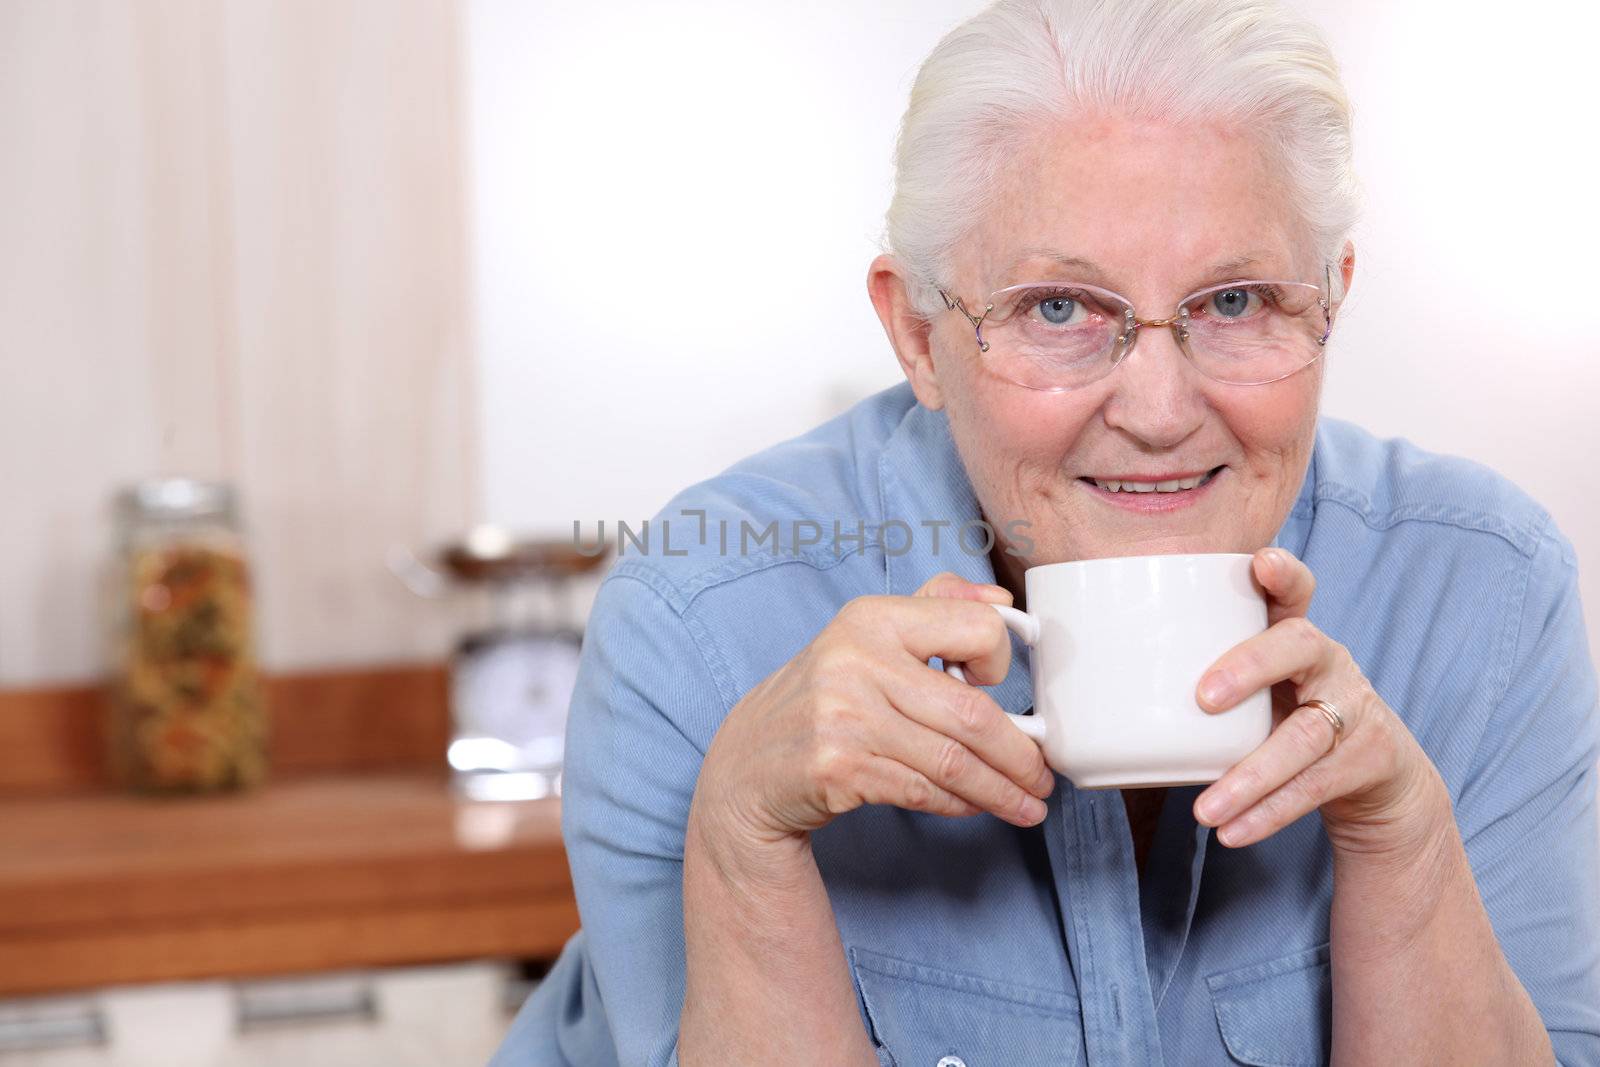 Elderly lady enjoying cup of tea in her kitchen by phovoir